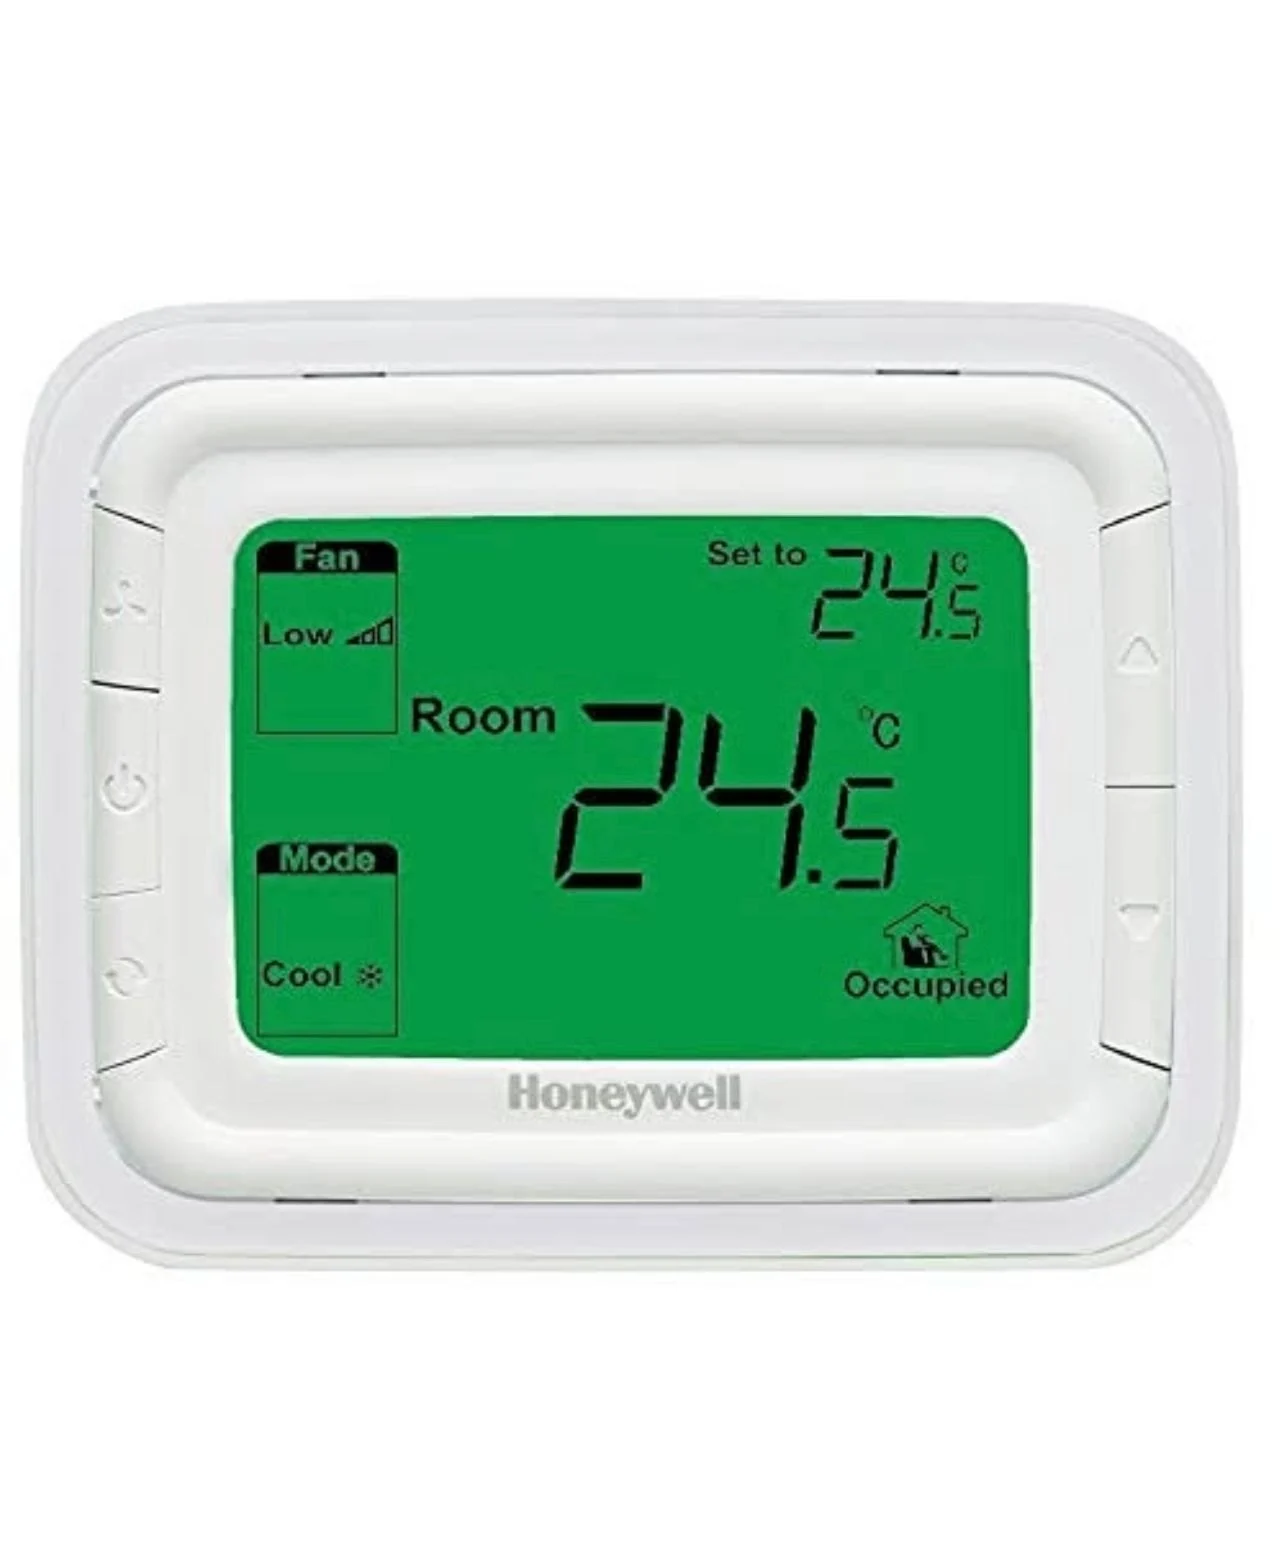 honeywell digital thermostat temperature set to cool